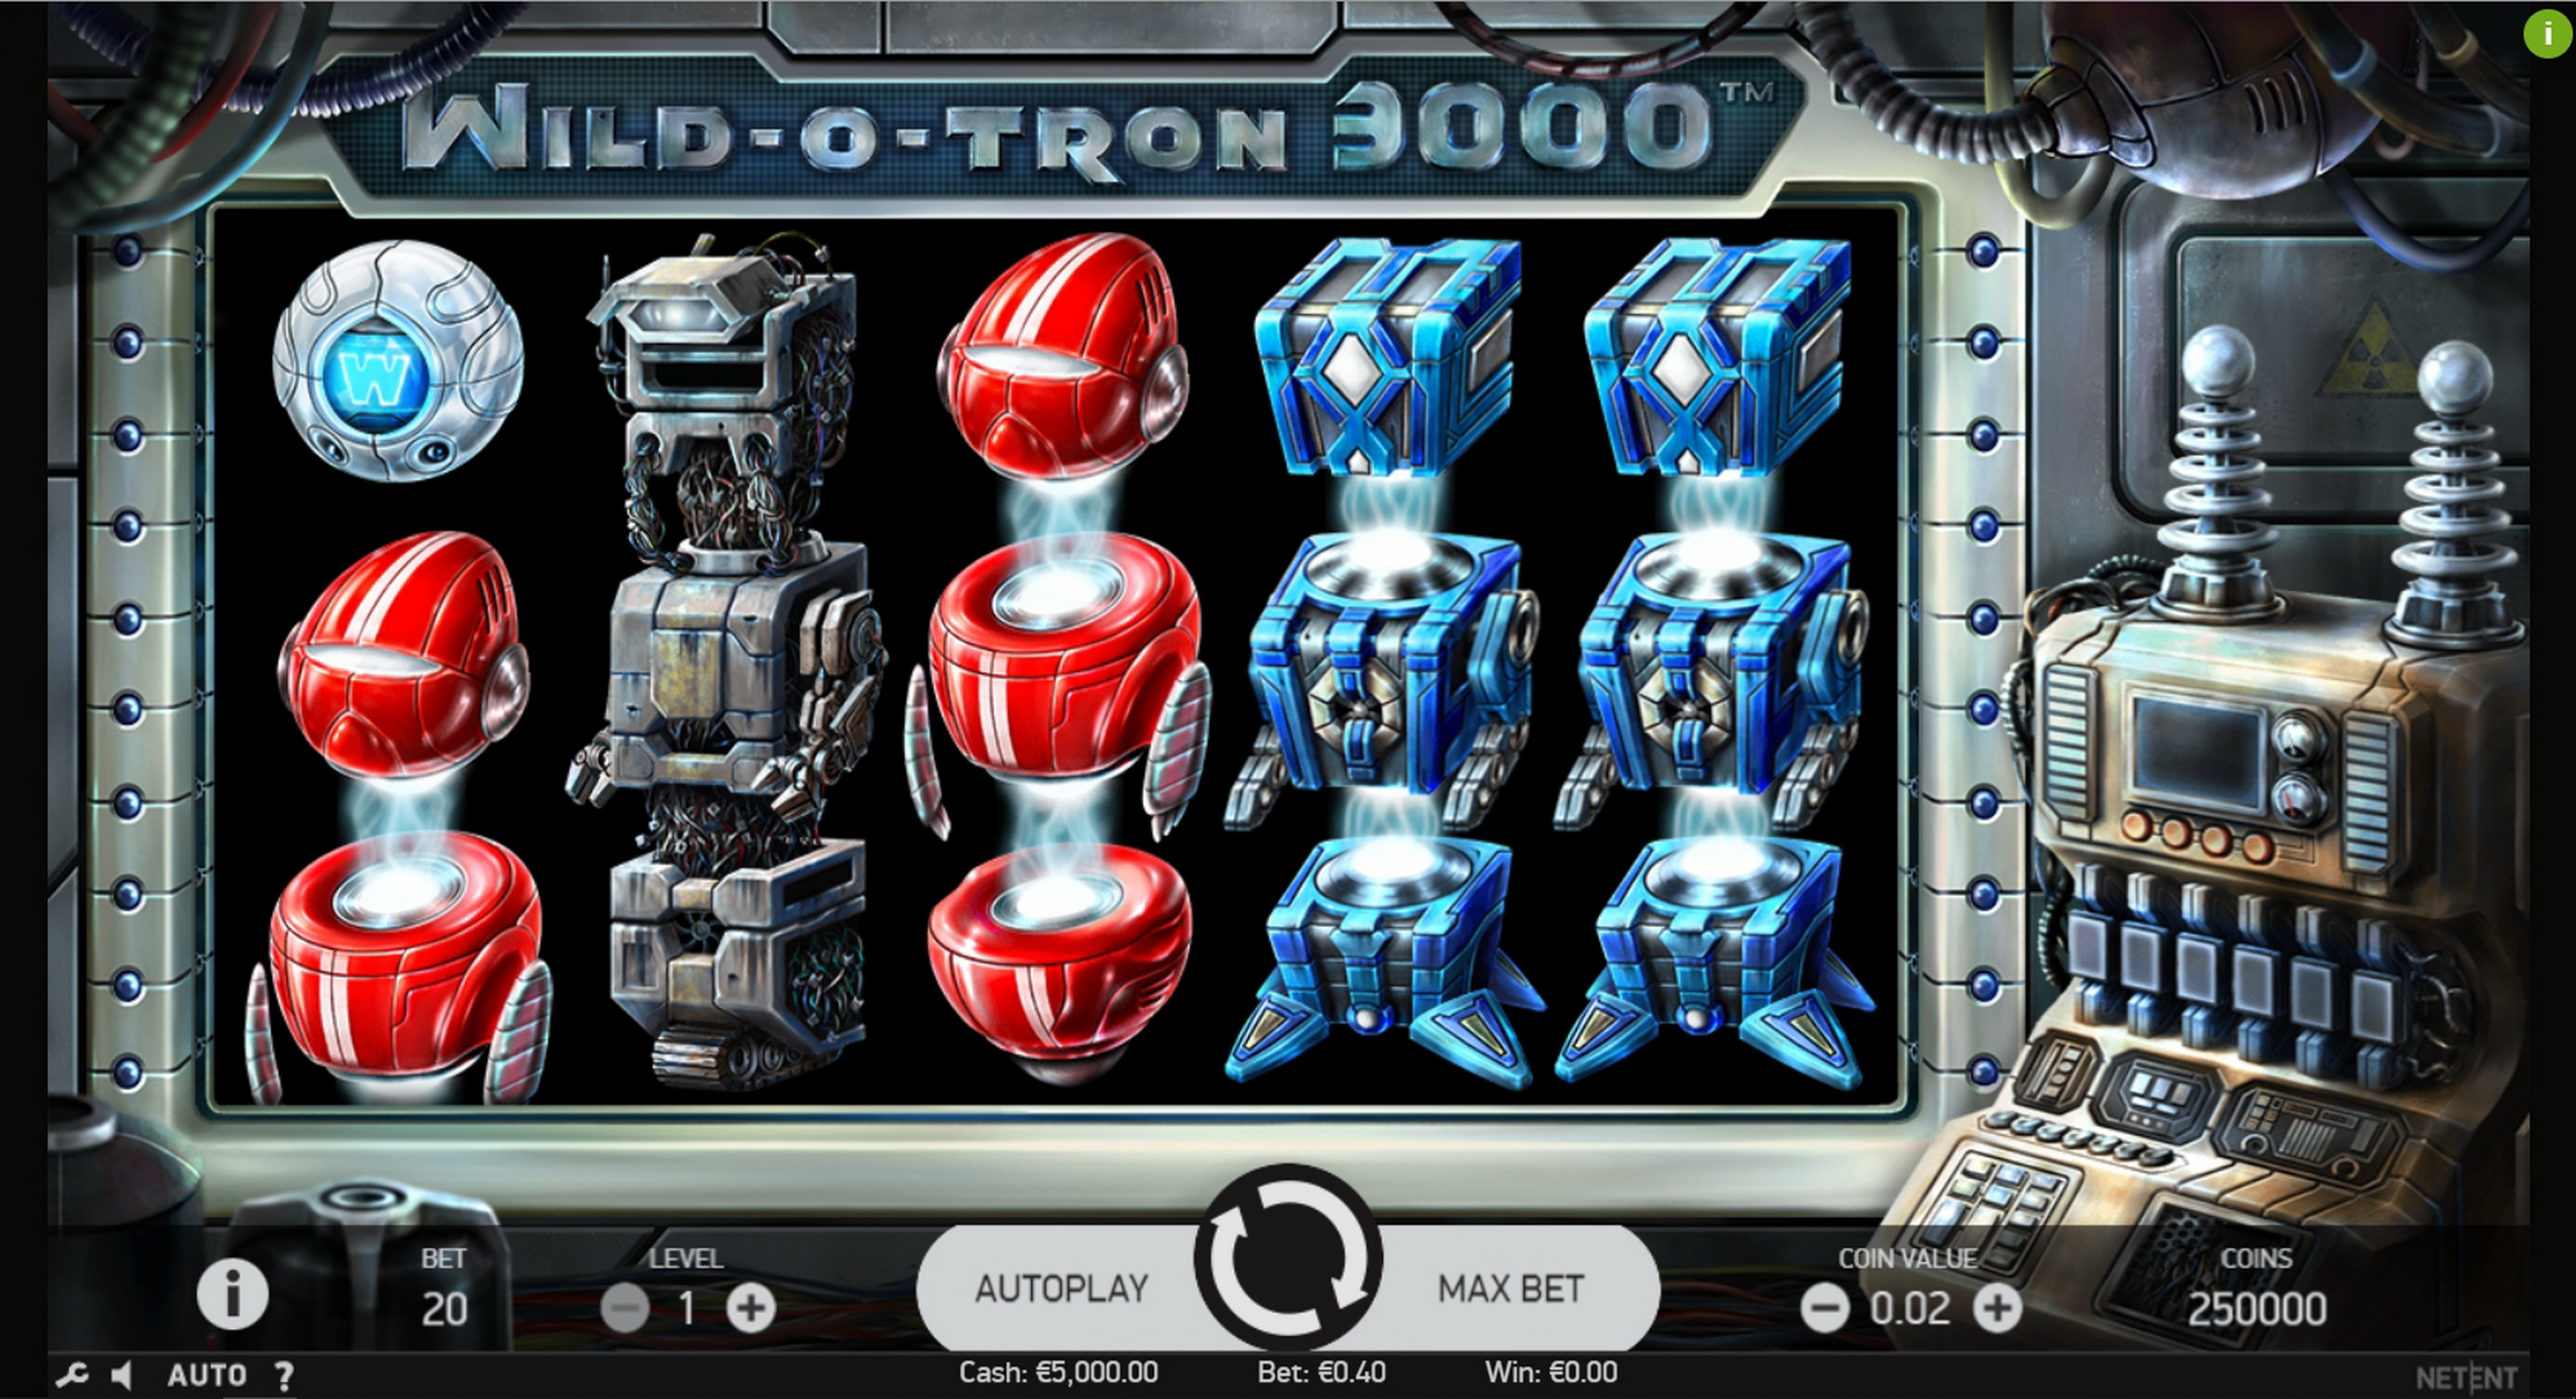 Reels in Wild-O-Tron 3000 Slot Game by NetEnt